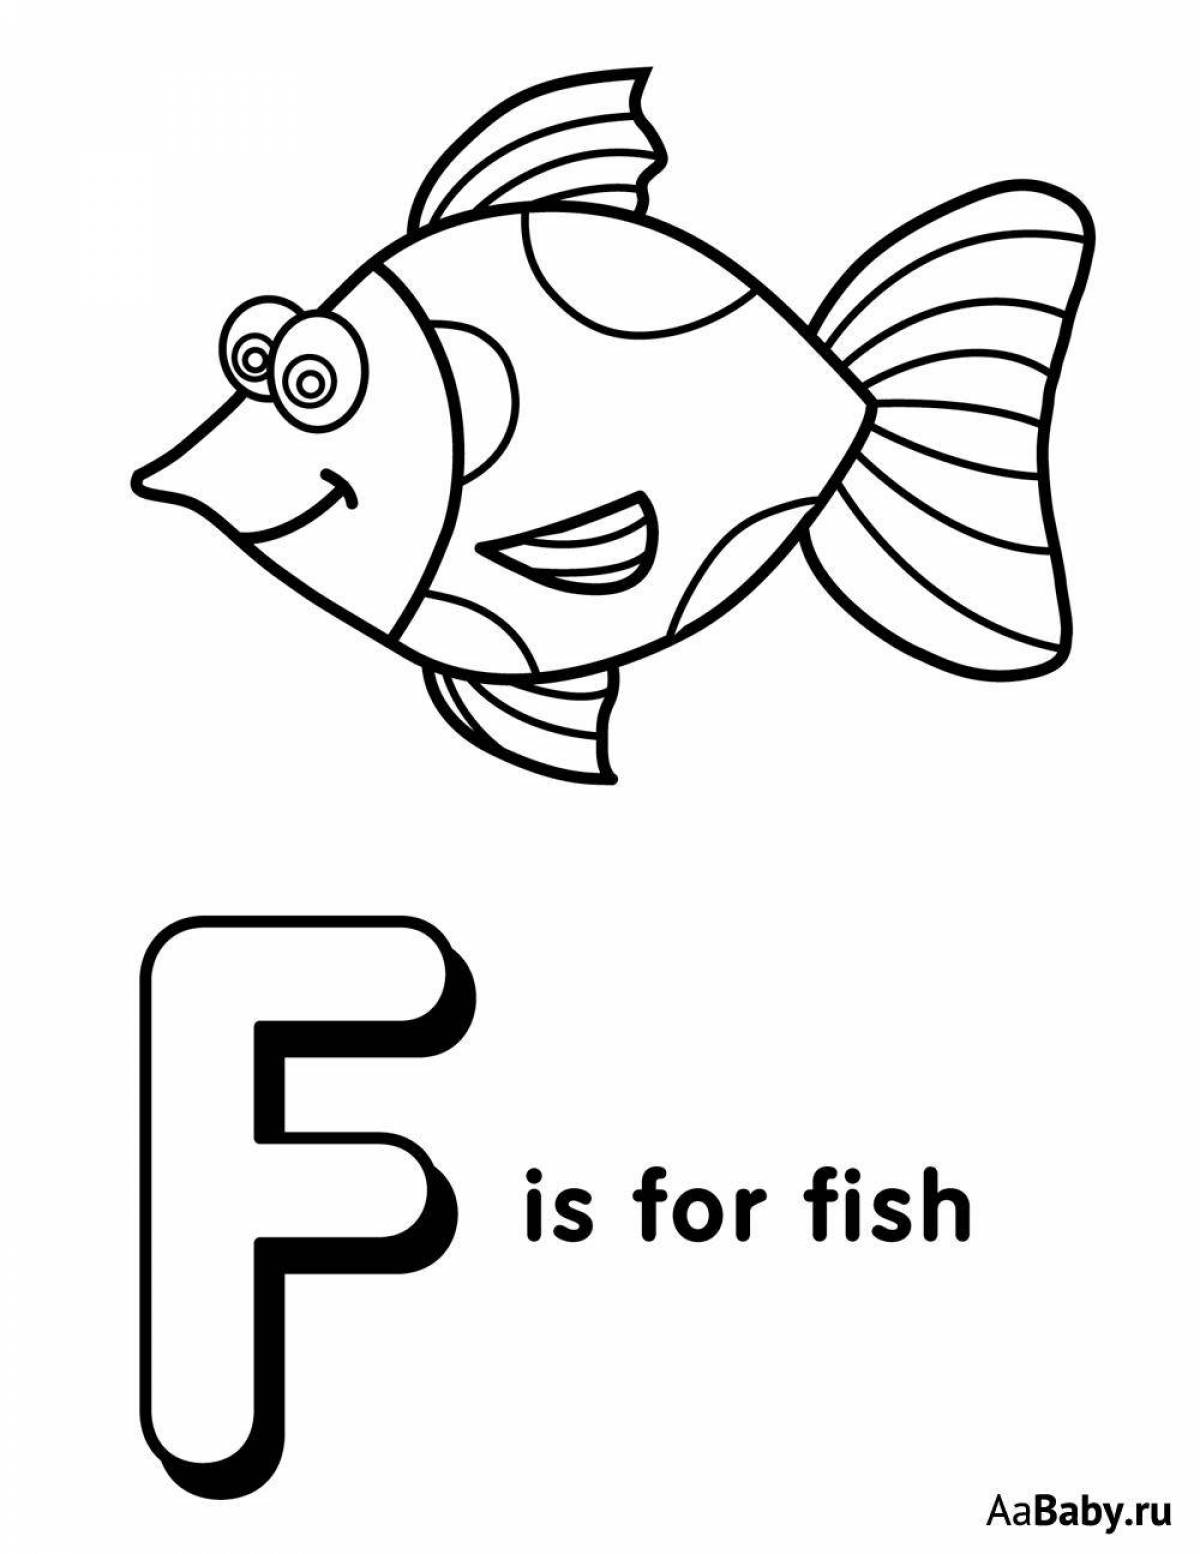 Exciting english letter f coloring book